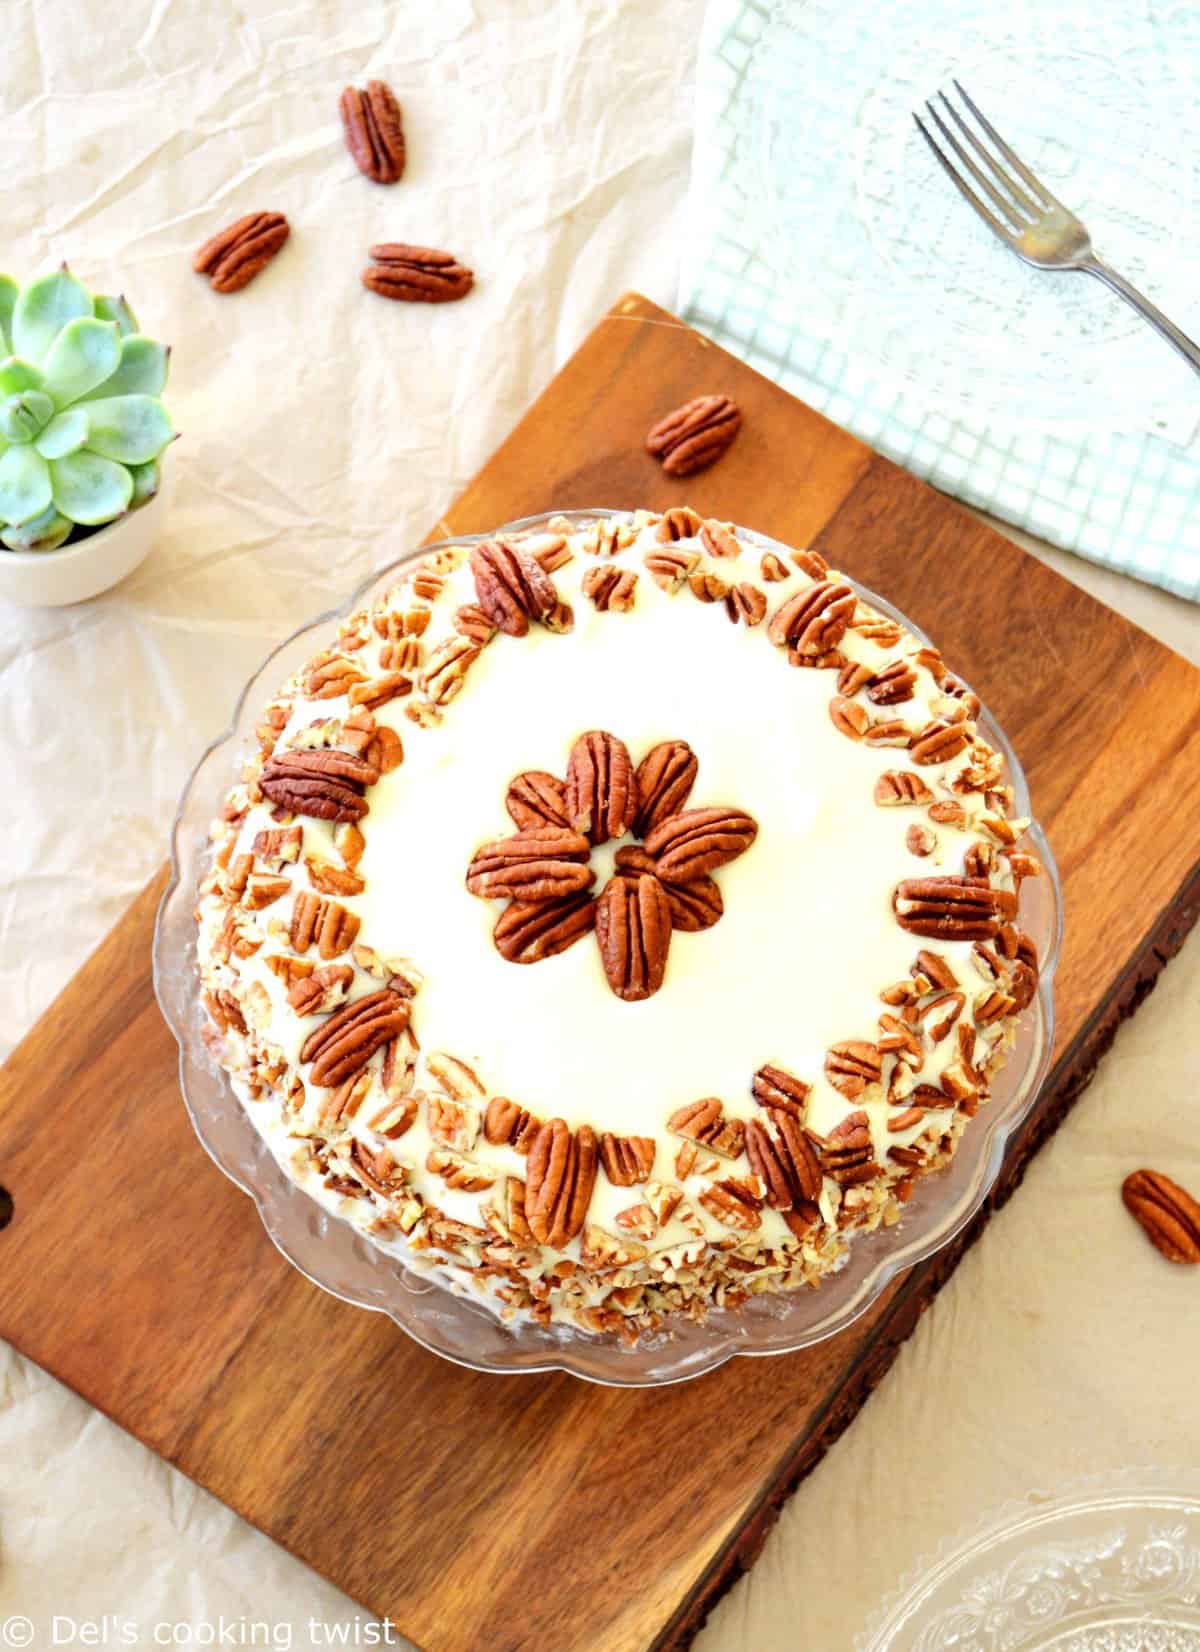 Best Ever Carrot Cake — Del's cooking twist